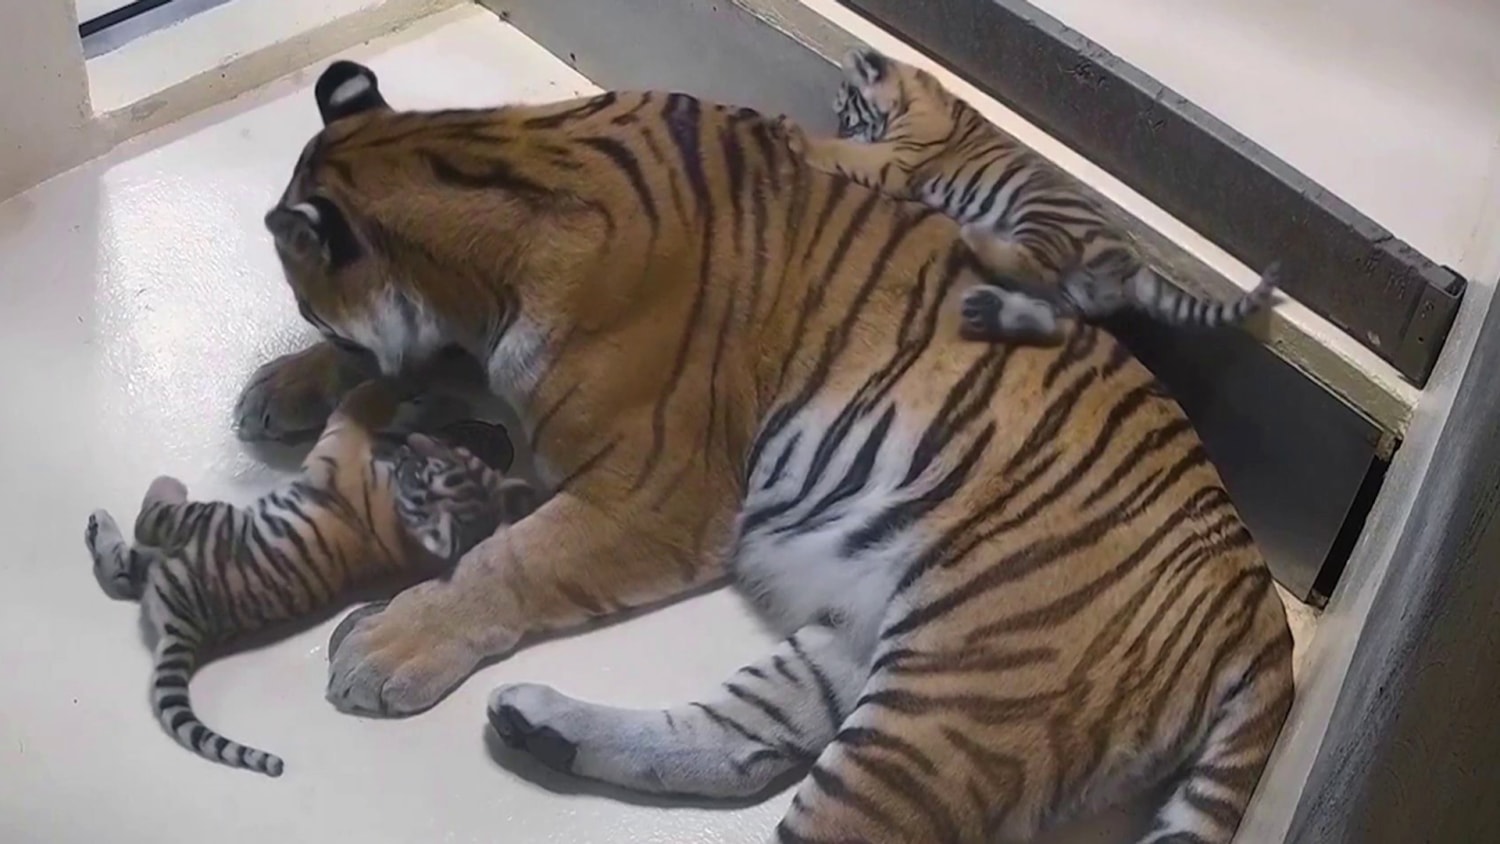 TODAY reveals names of twin tiger cubs at Toledo Zoo